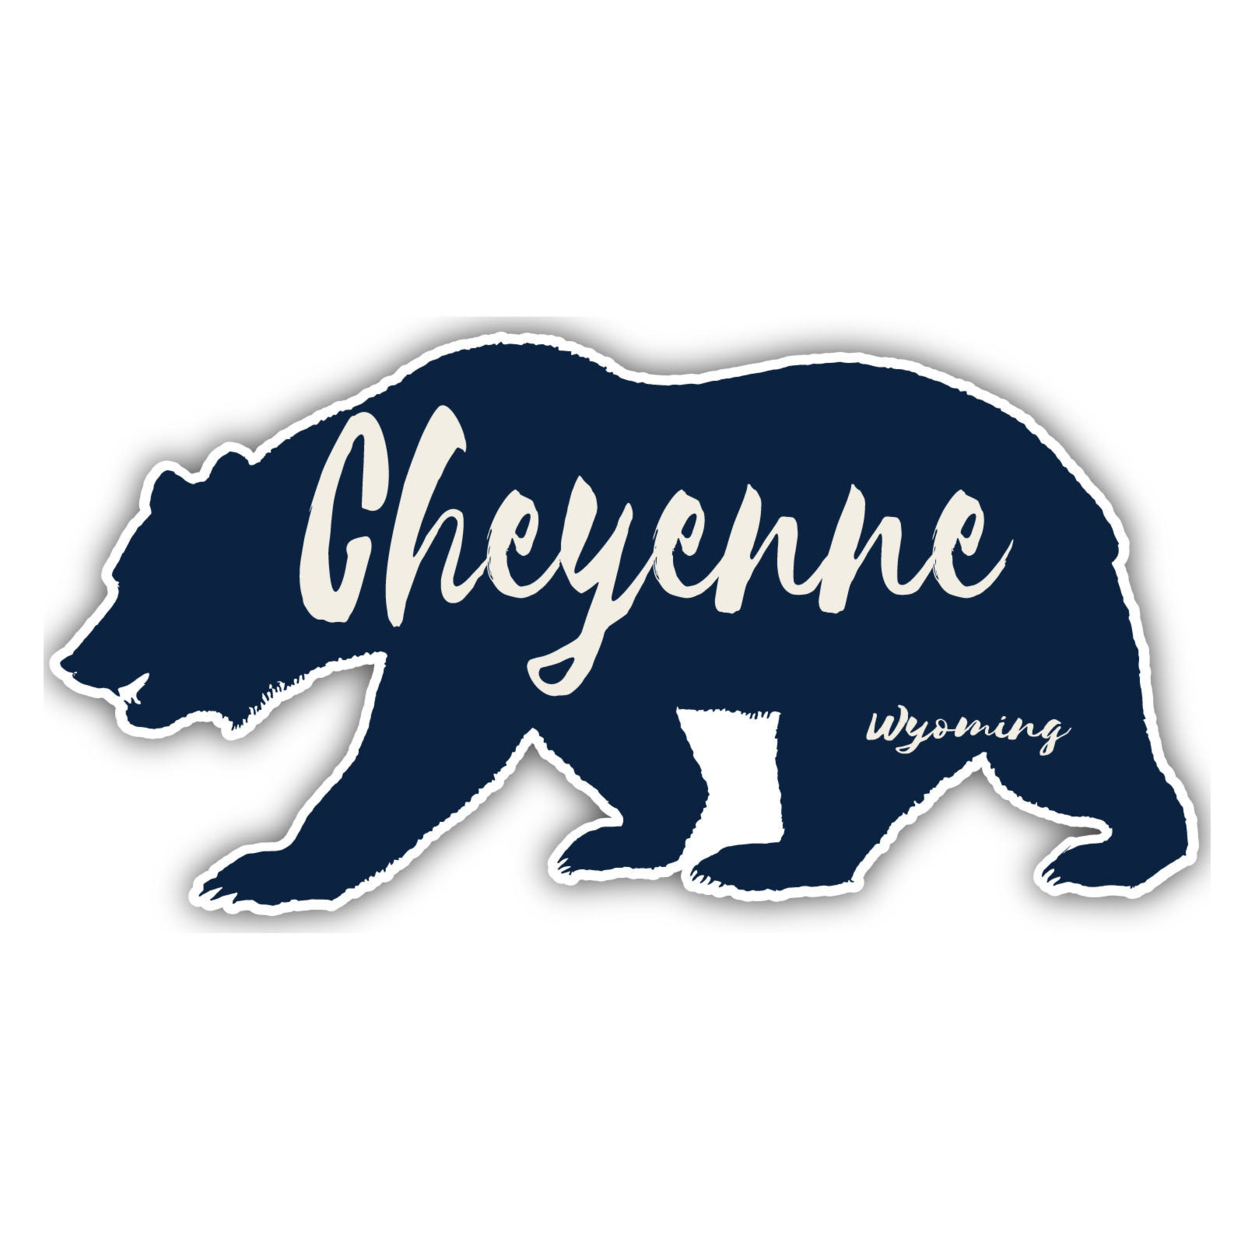 Cheyenne Wyoming Souvenir Decorative Stickers (Choose Theme And Size) - Single Unit, 8-Inch, Camp Life